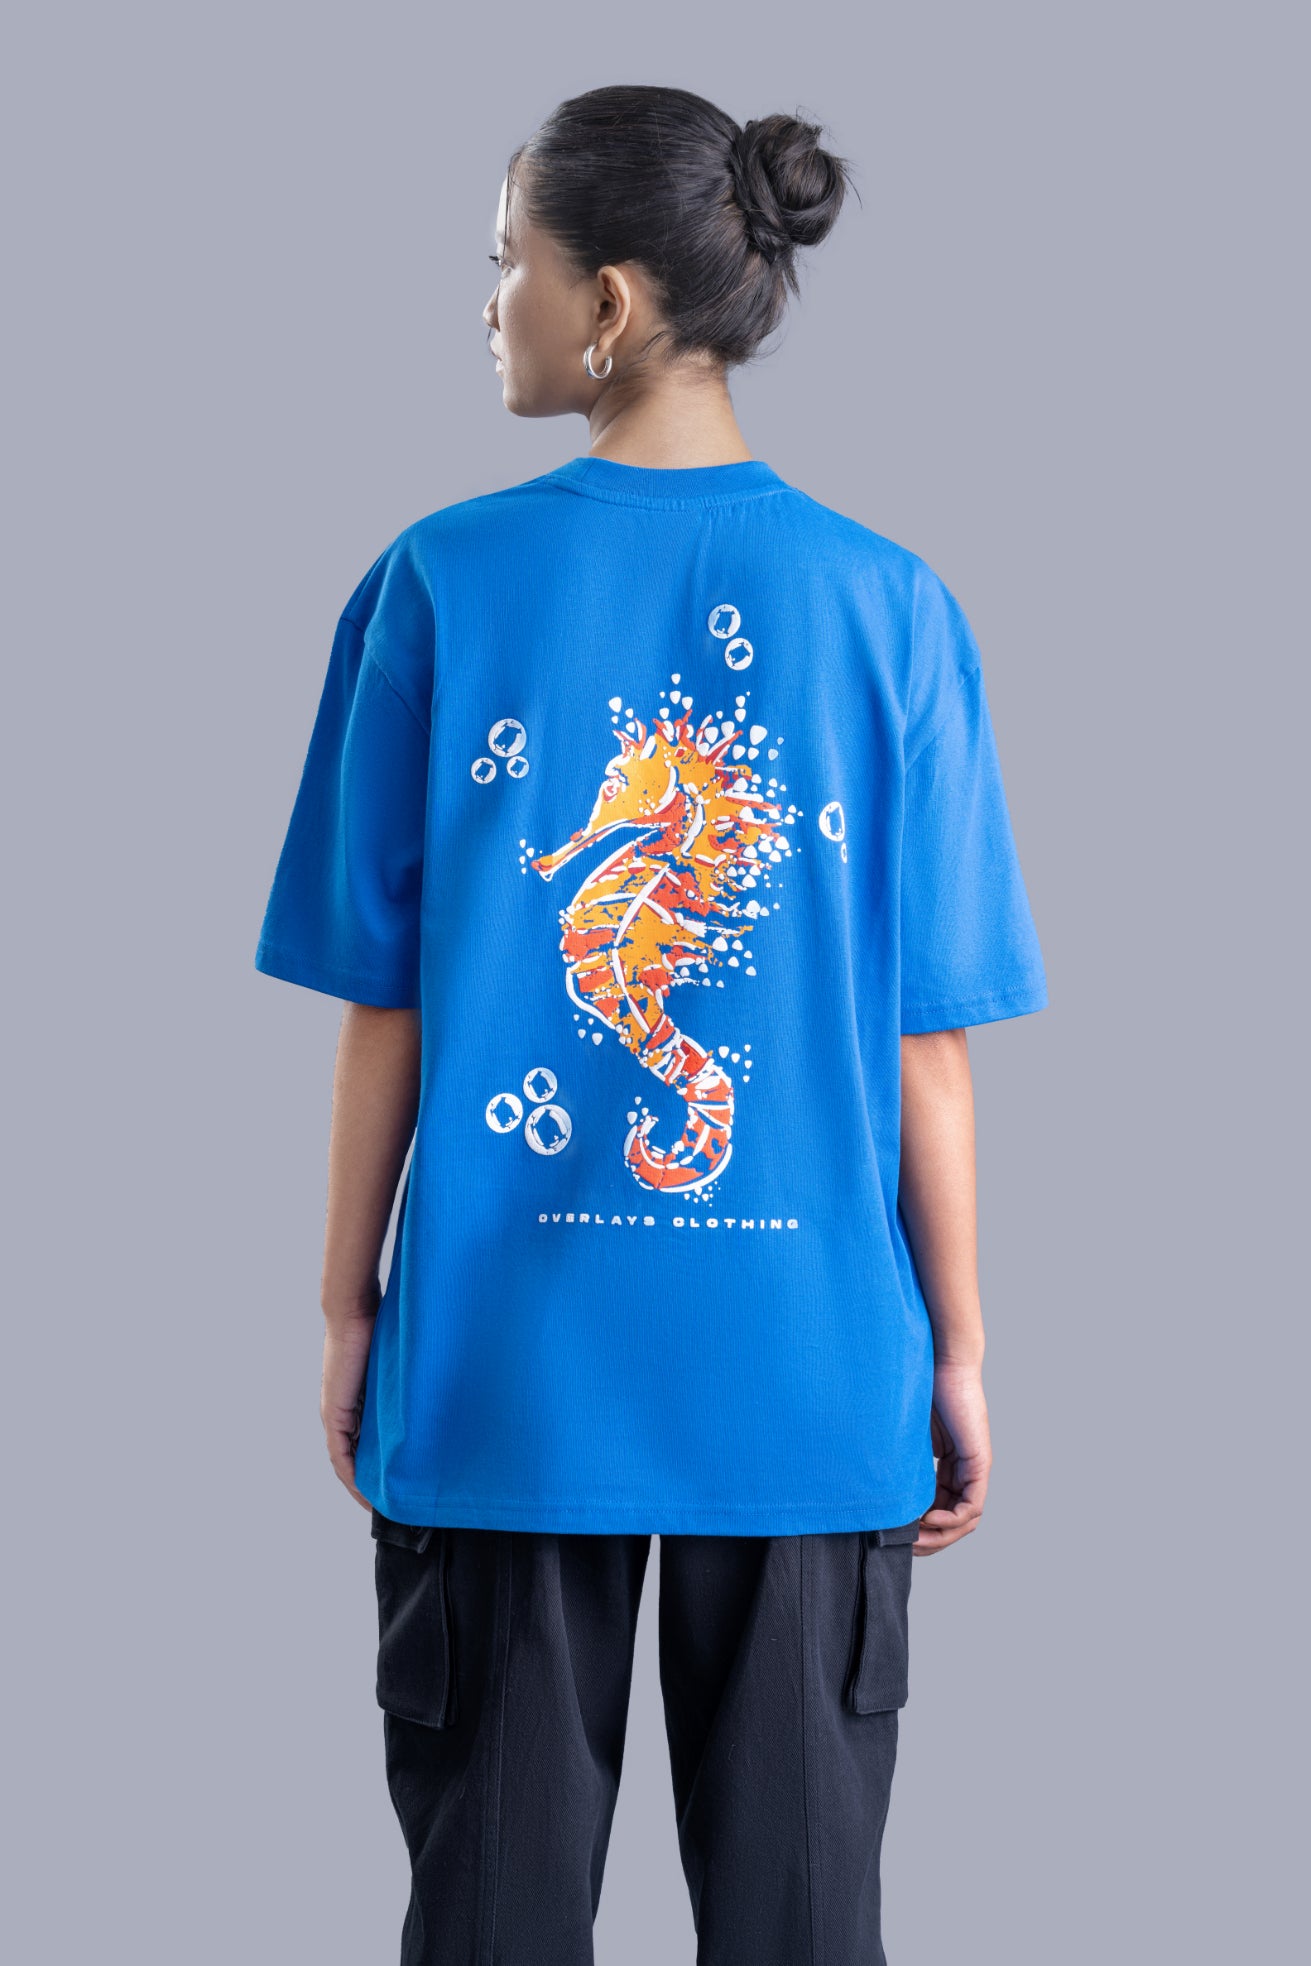 Relaxed Fit Women's Sea Stallion Tshirt